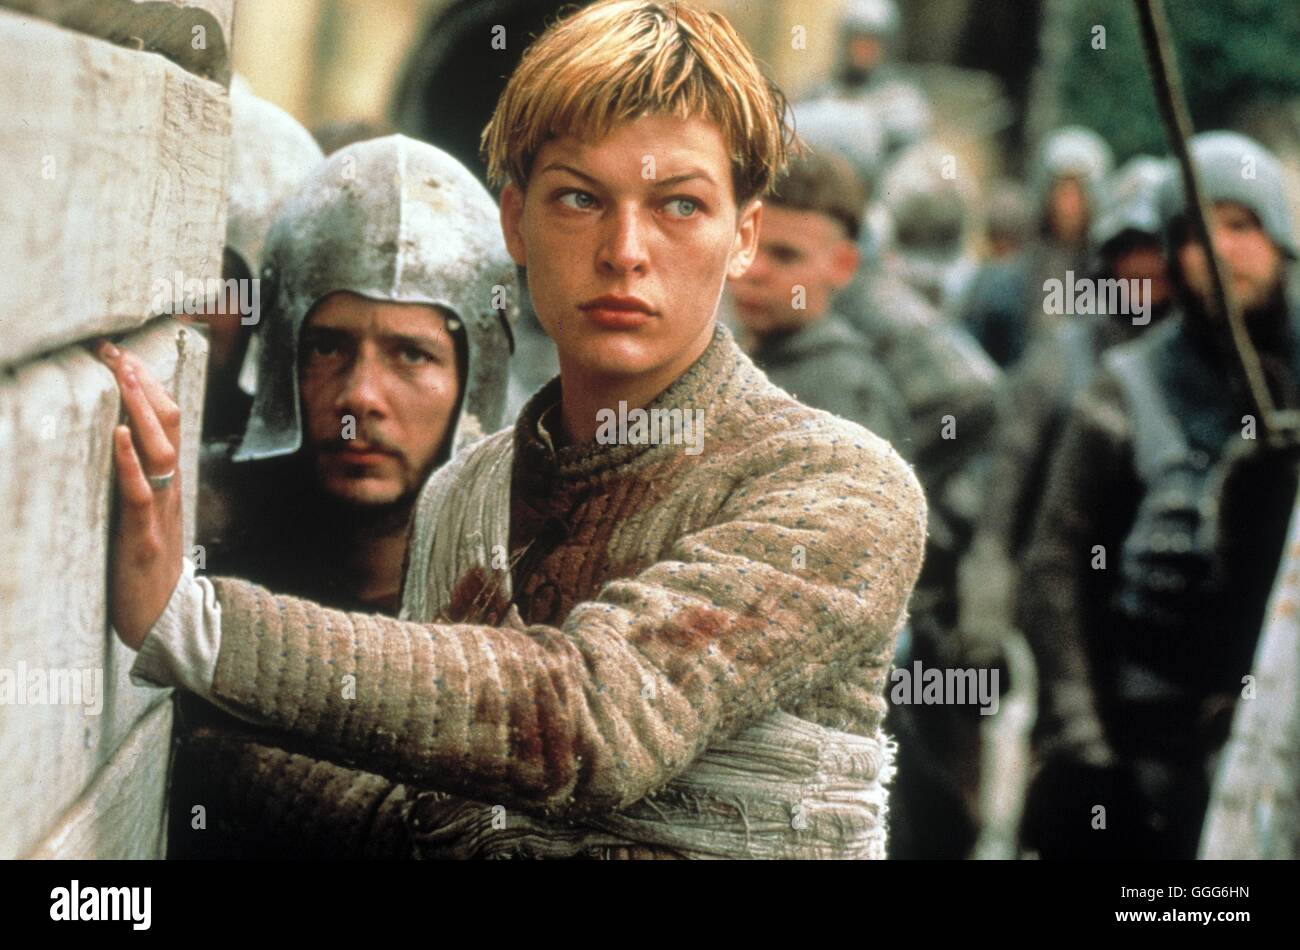 JOHANNA VON ORLEANS / The Messenger: The Story of Joan of Arc  Frankreich/USA 1999 / Luc Besson MILLA JOVOVICH, 'Joan of Arc', 1999.  Regie: Luc Besson aka. The Messenger: The Story of